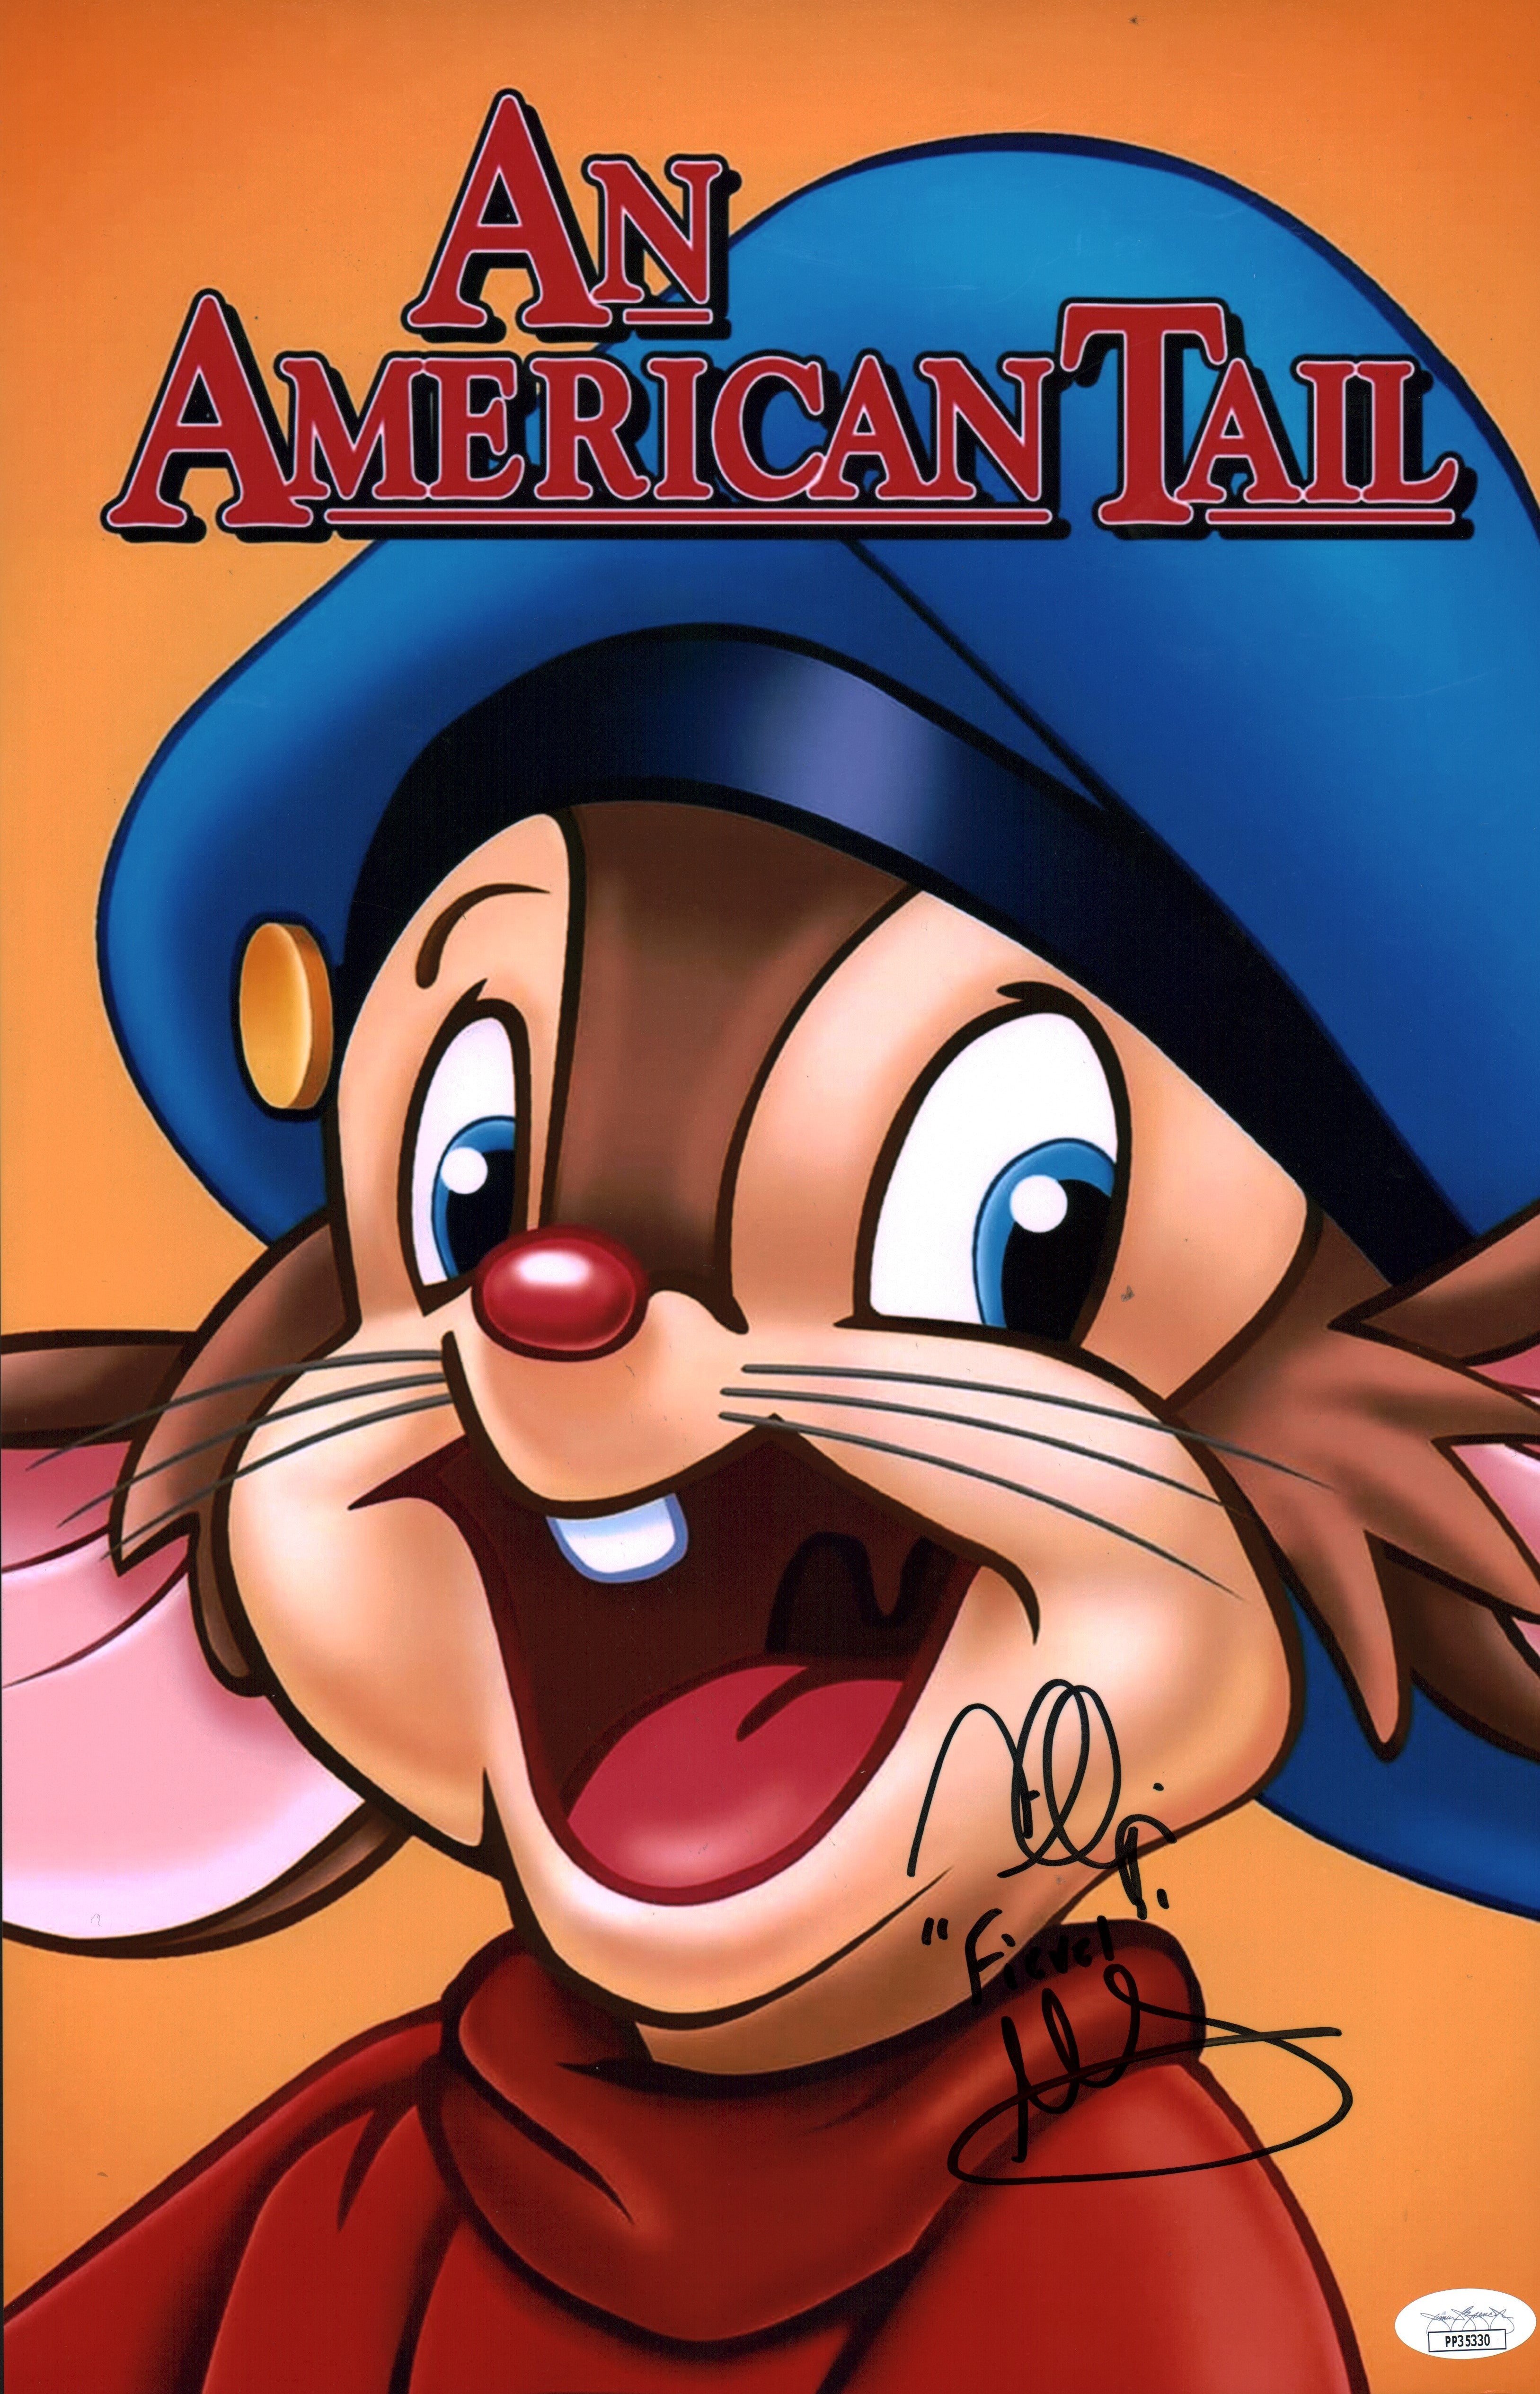 Phillip Glasser An American Tail 11x17 Photo Poster Signed Autograph JSA COA Certified Auto